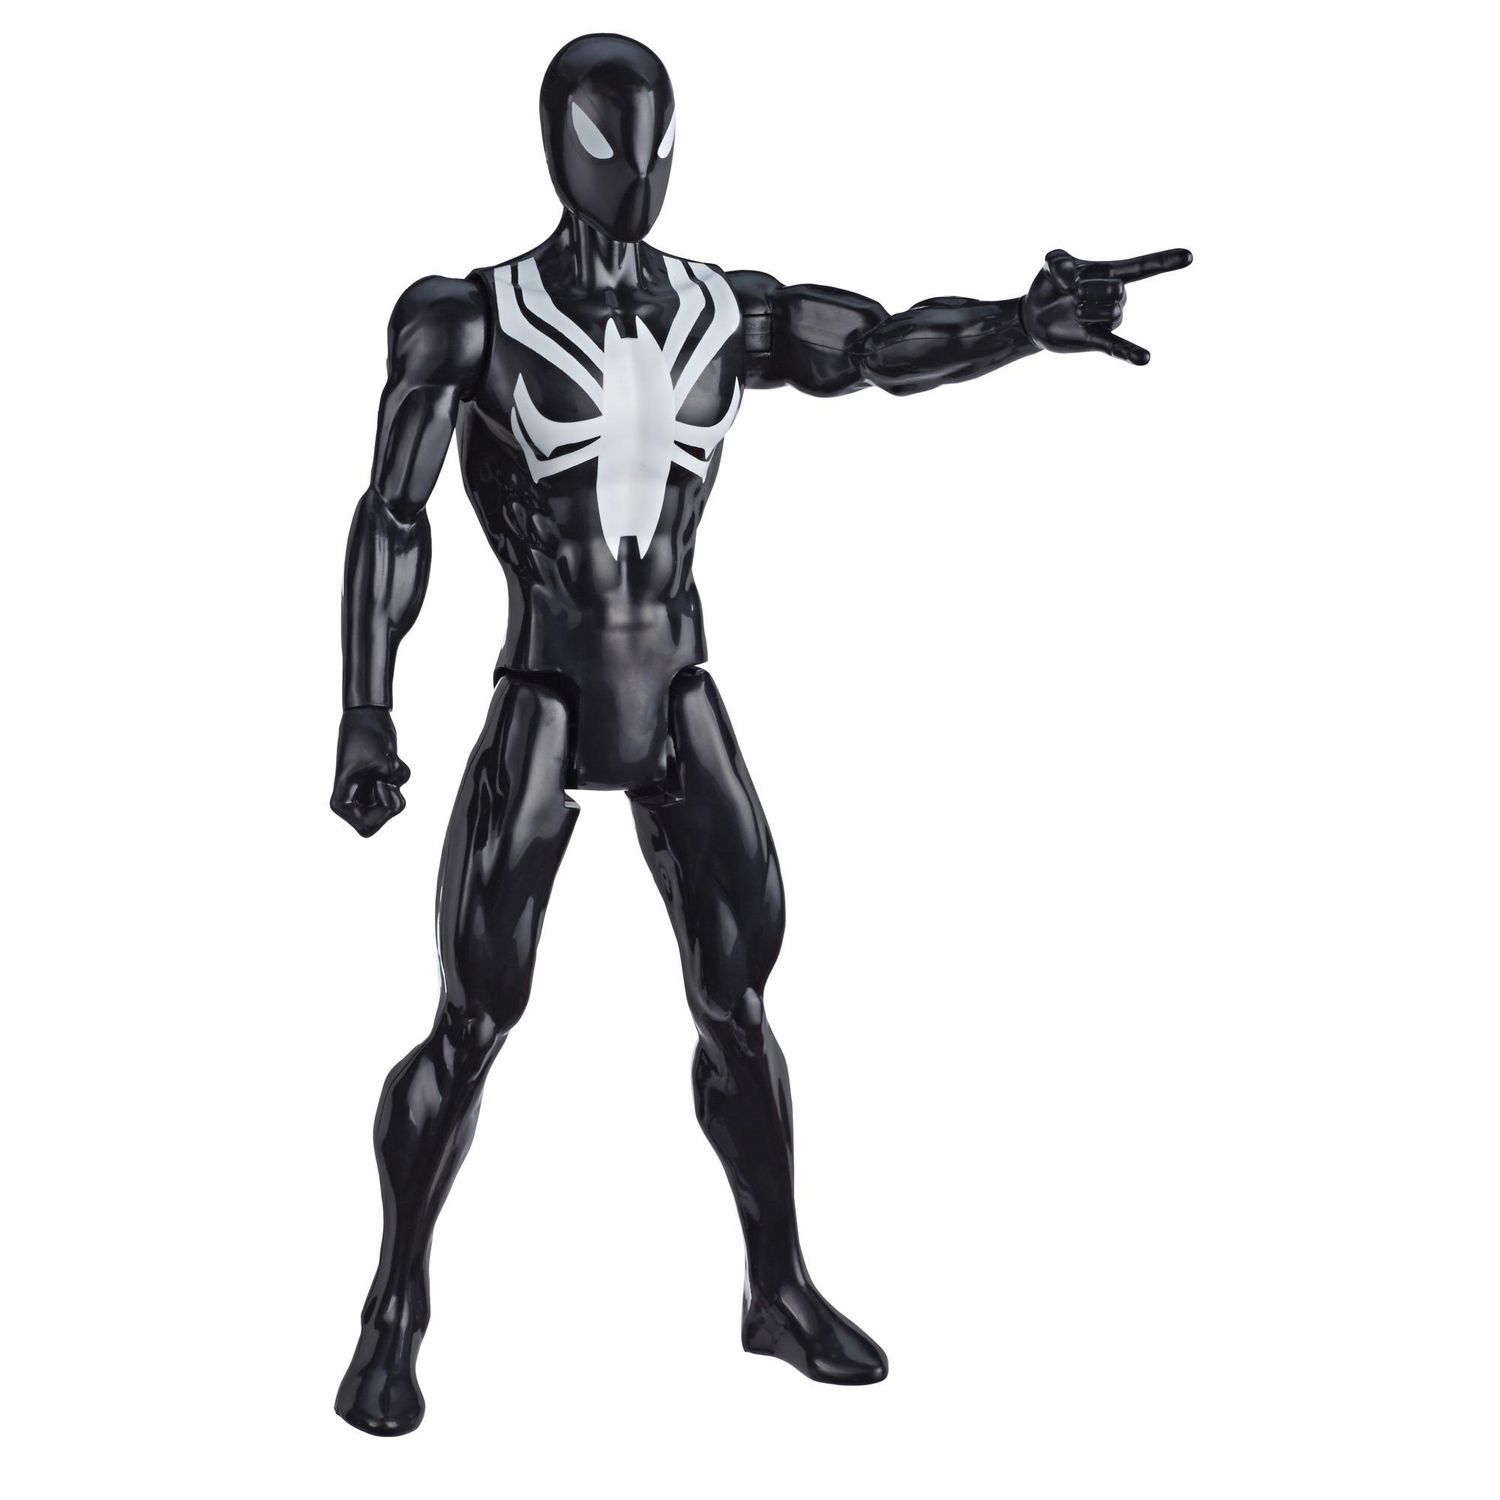 Marvel Spider-Man: Titan Hero Series Villains Black Suit Spider-Man  12-Inch-Scale Super Hero Action Figure Toy Great Kids For Ages 4 And Up |  Walmart Canada